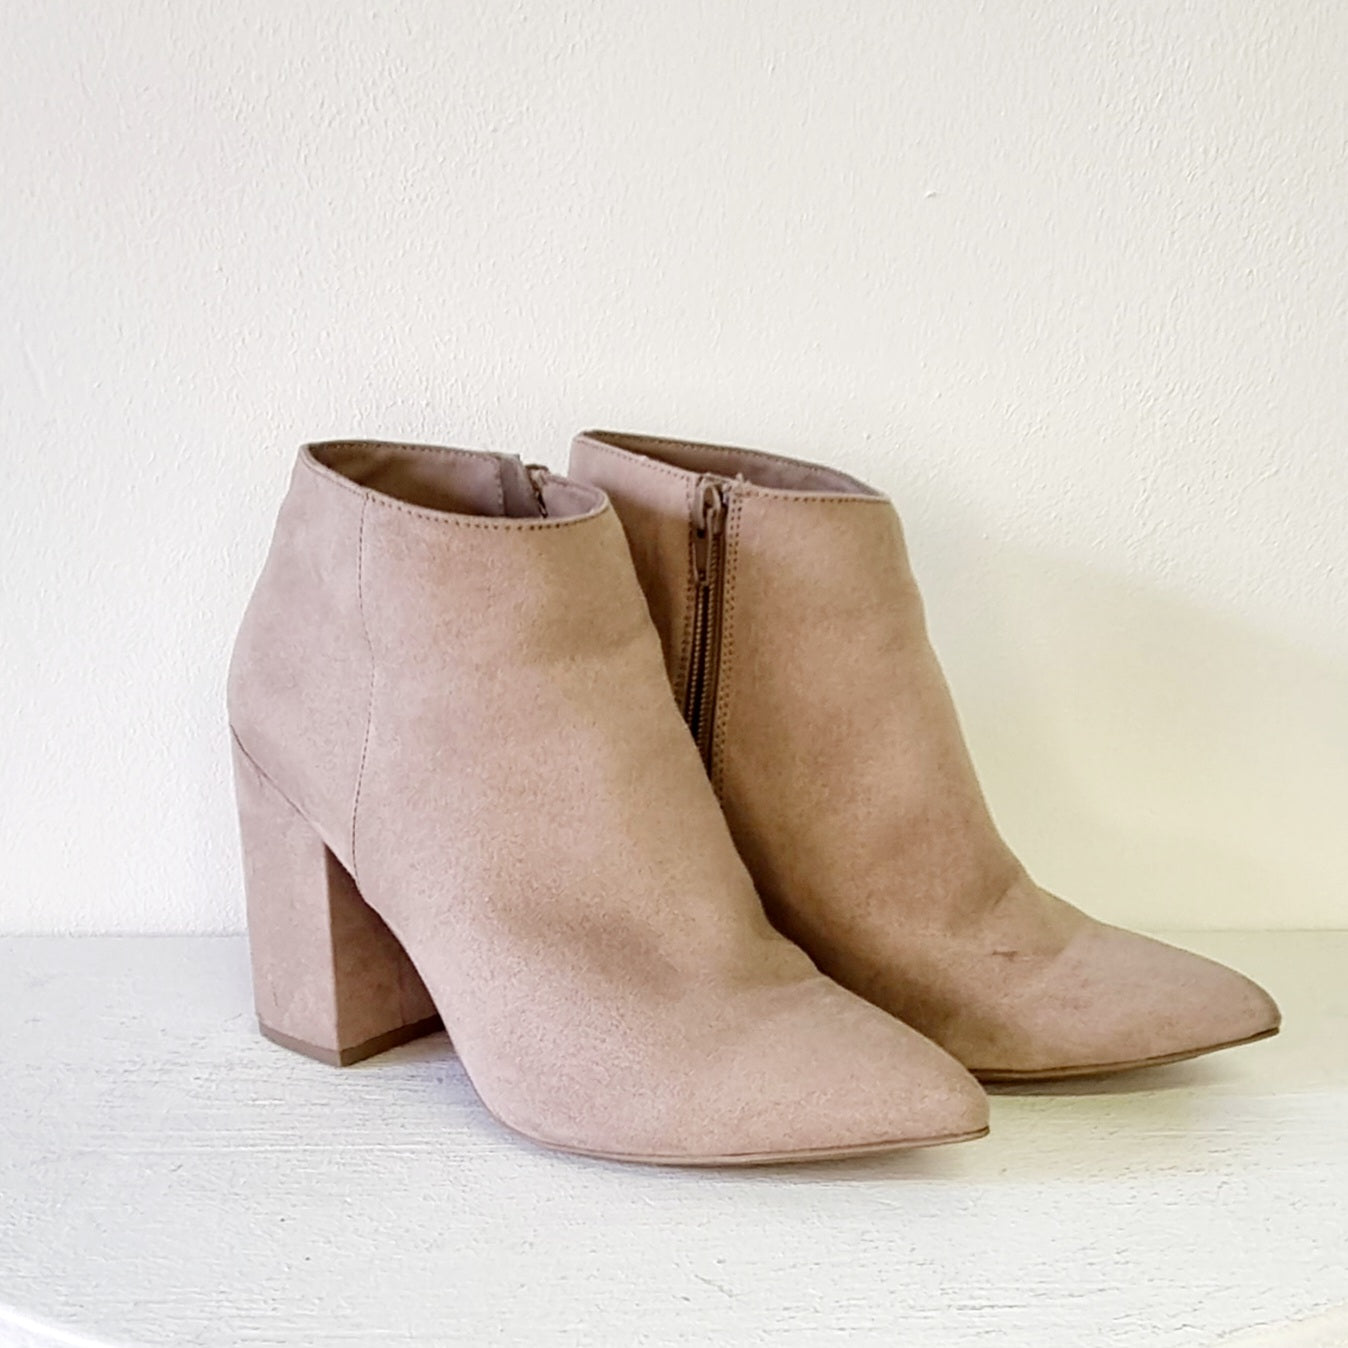 H&M - Desert Sand Suede Square Heeled Inner Zip Ankle Boots